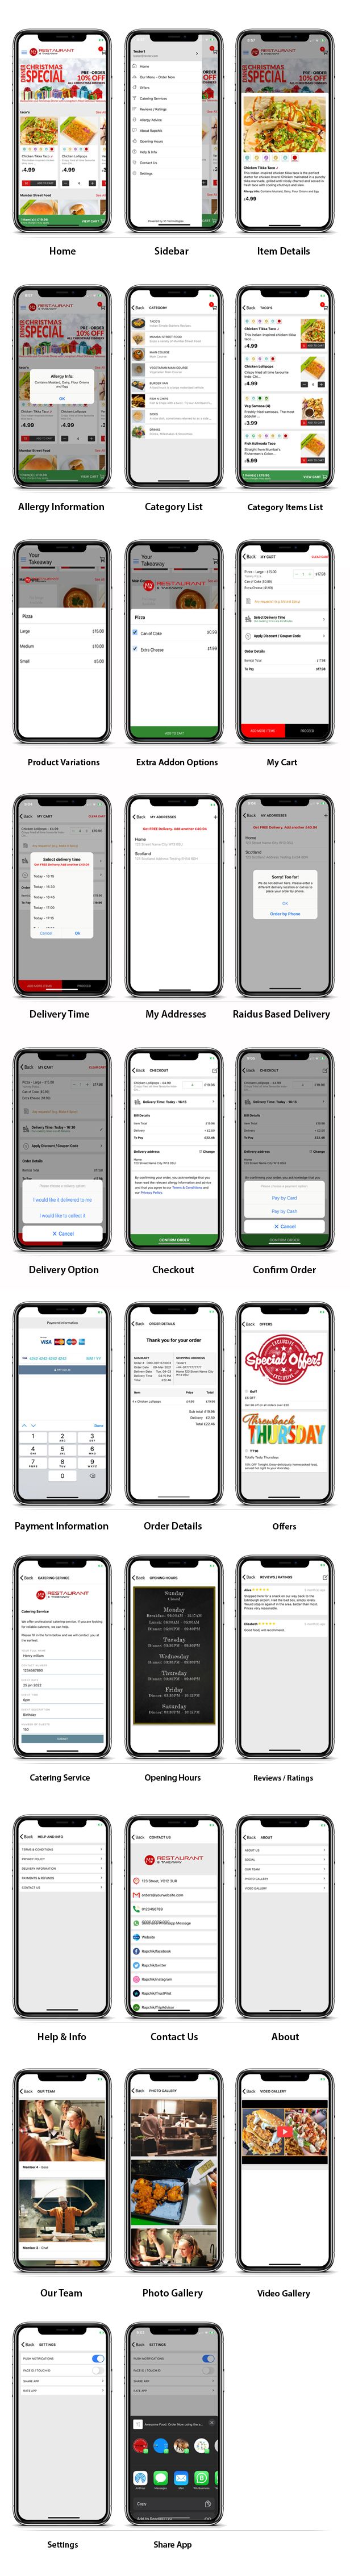 Best Takeaway Restaurant Online Food Ordering Delivery System - iOs Android Kitchen Onwer Web Admin - 14